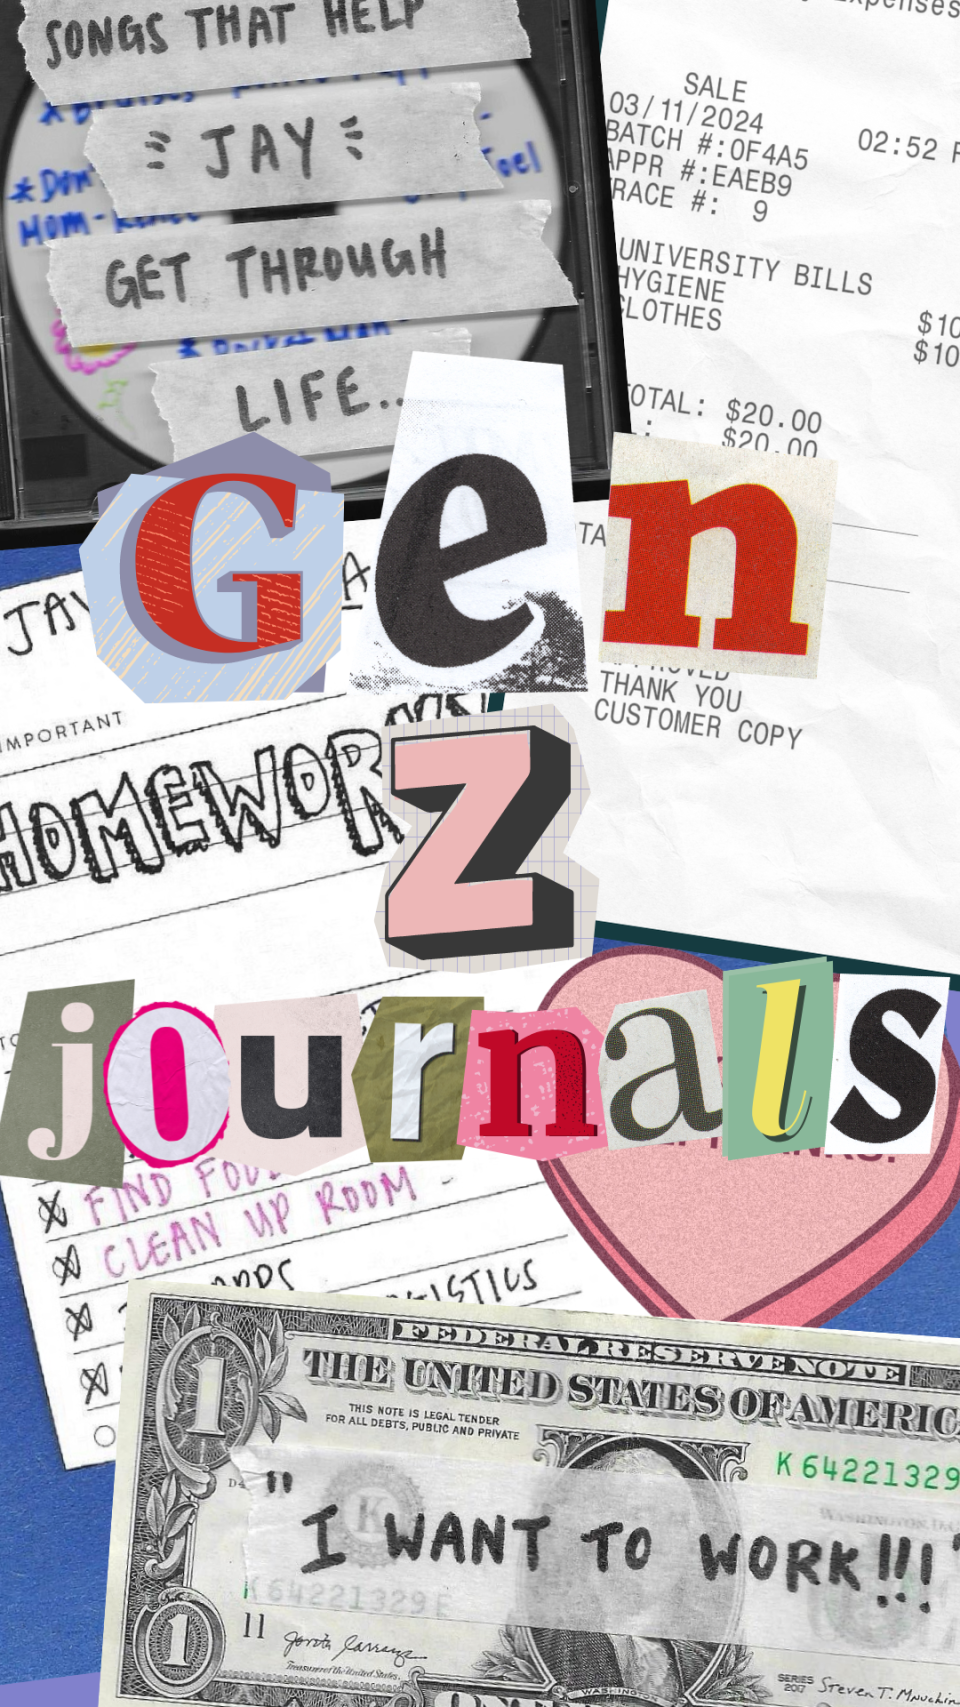 Collage of assorted notes and reminders including sale receipts, paper scraps, and journal entries, with "GEN Z journals" text overlay